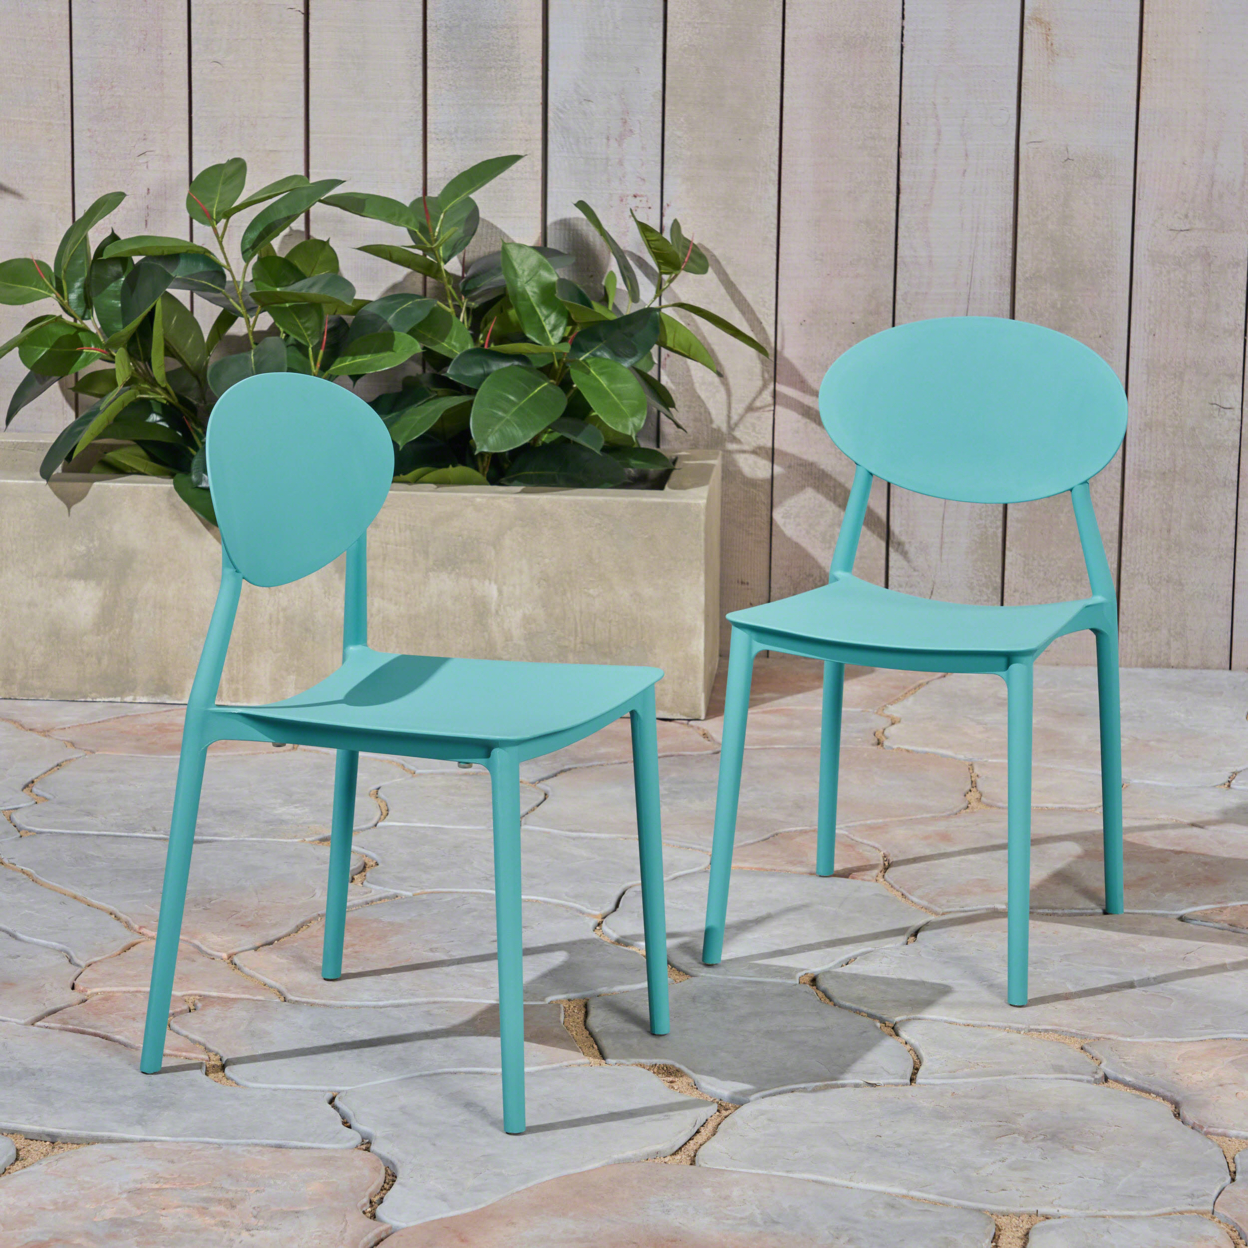 Brynn Outdoor Plastic Chairs (Set Of 2) - Teal, Set Of 4